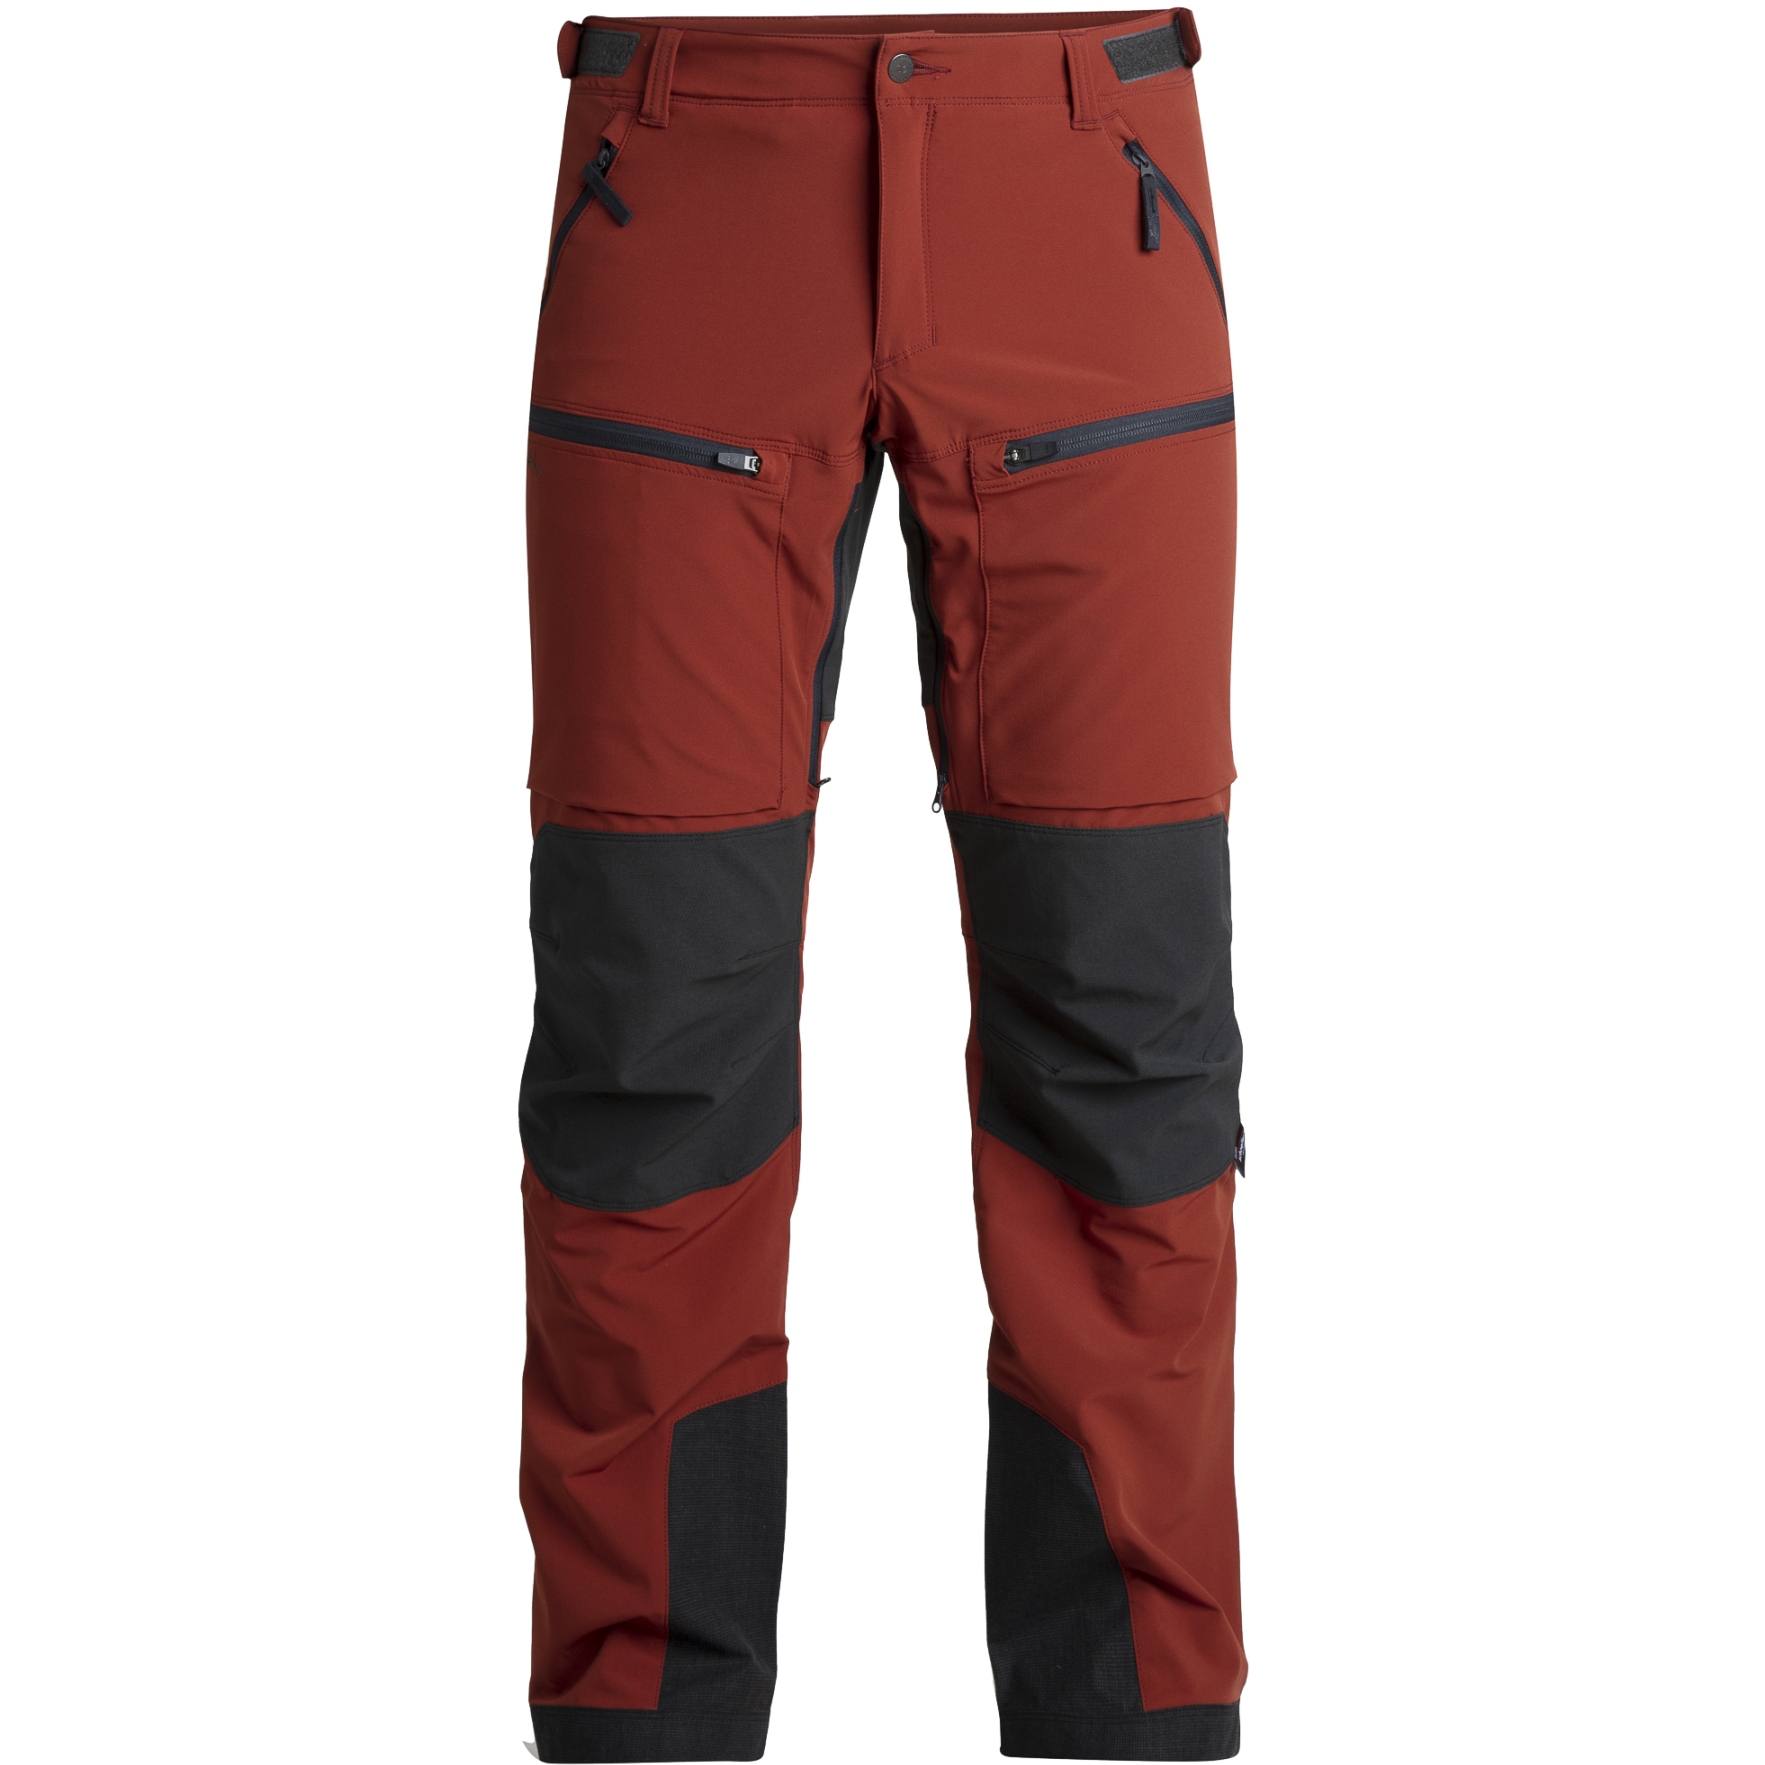 Picture of Lundhags Askro Pro Hiking Pants - Rust/Charcoal 311